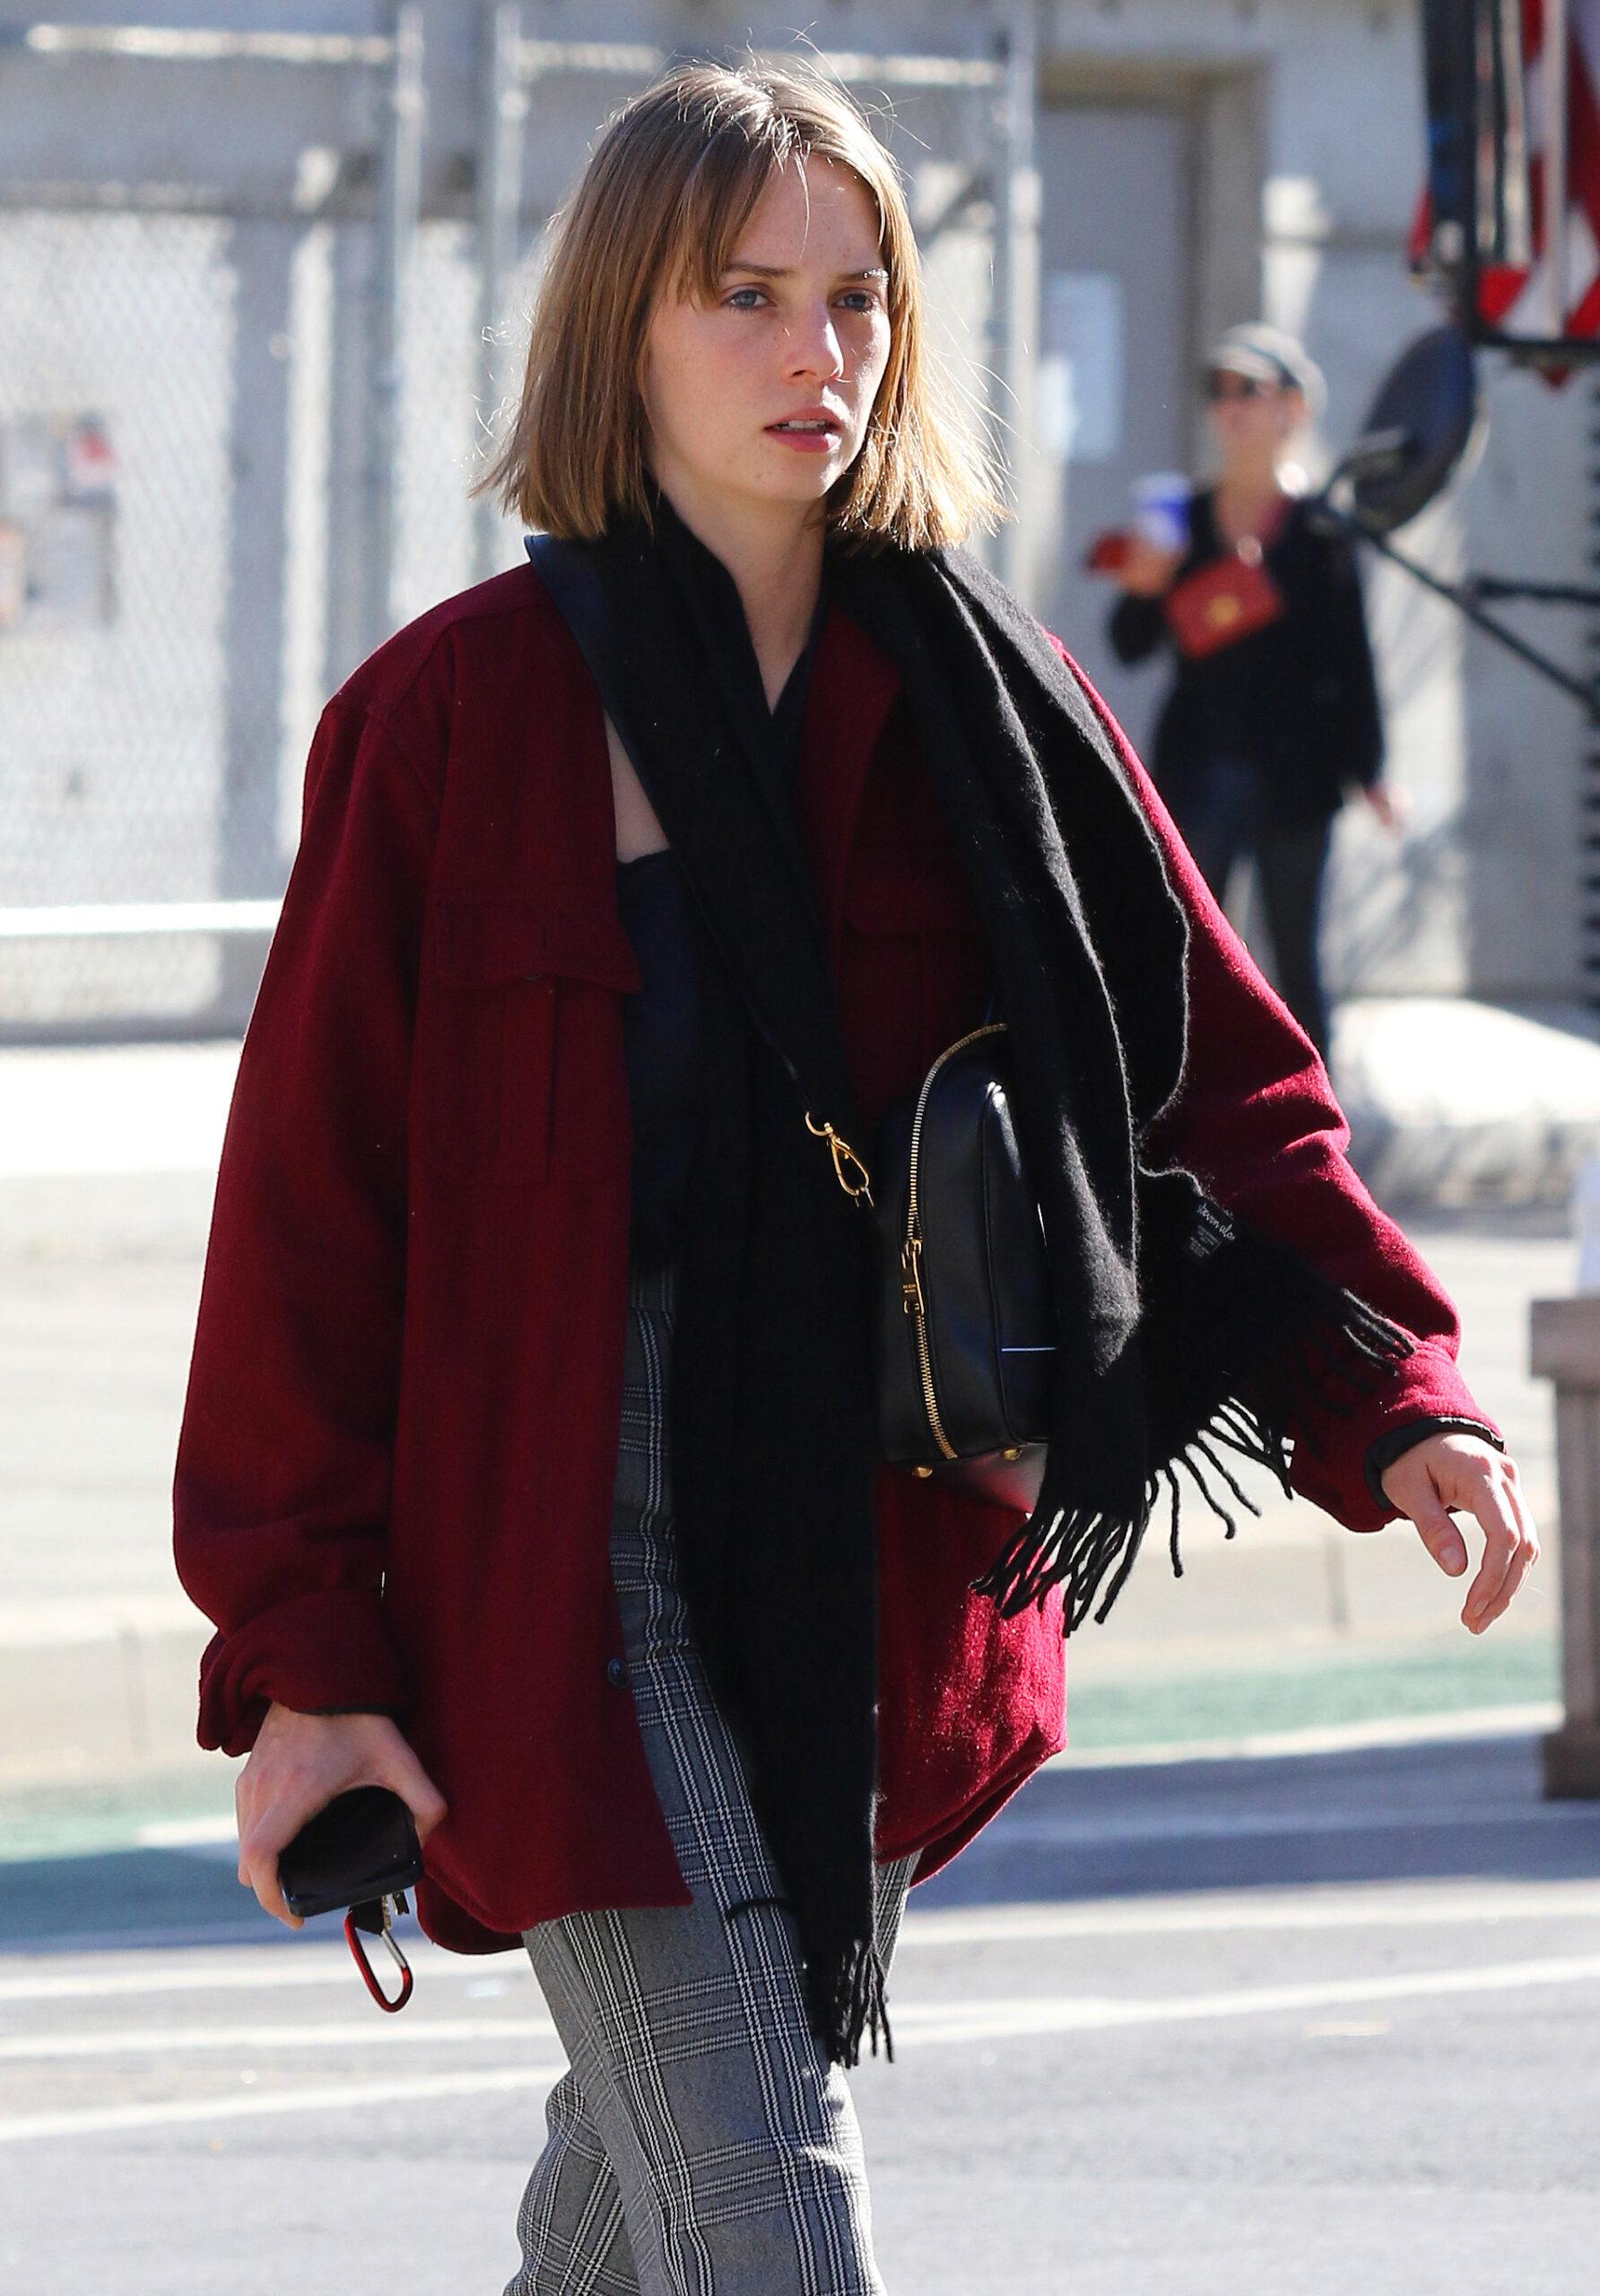 Stranger Things star Maya Hawke looks happy while walking with male friend after having lunch in NYC